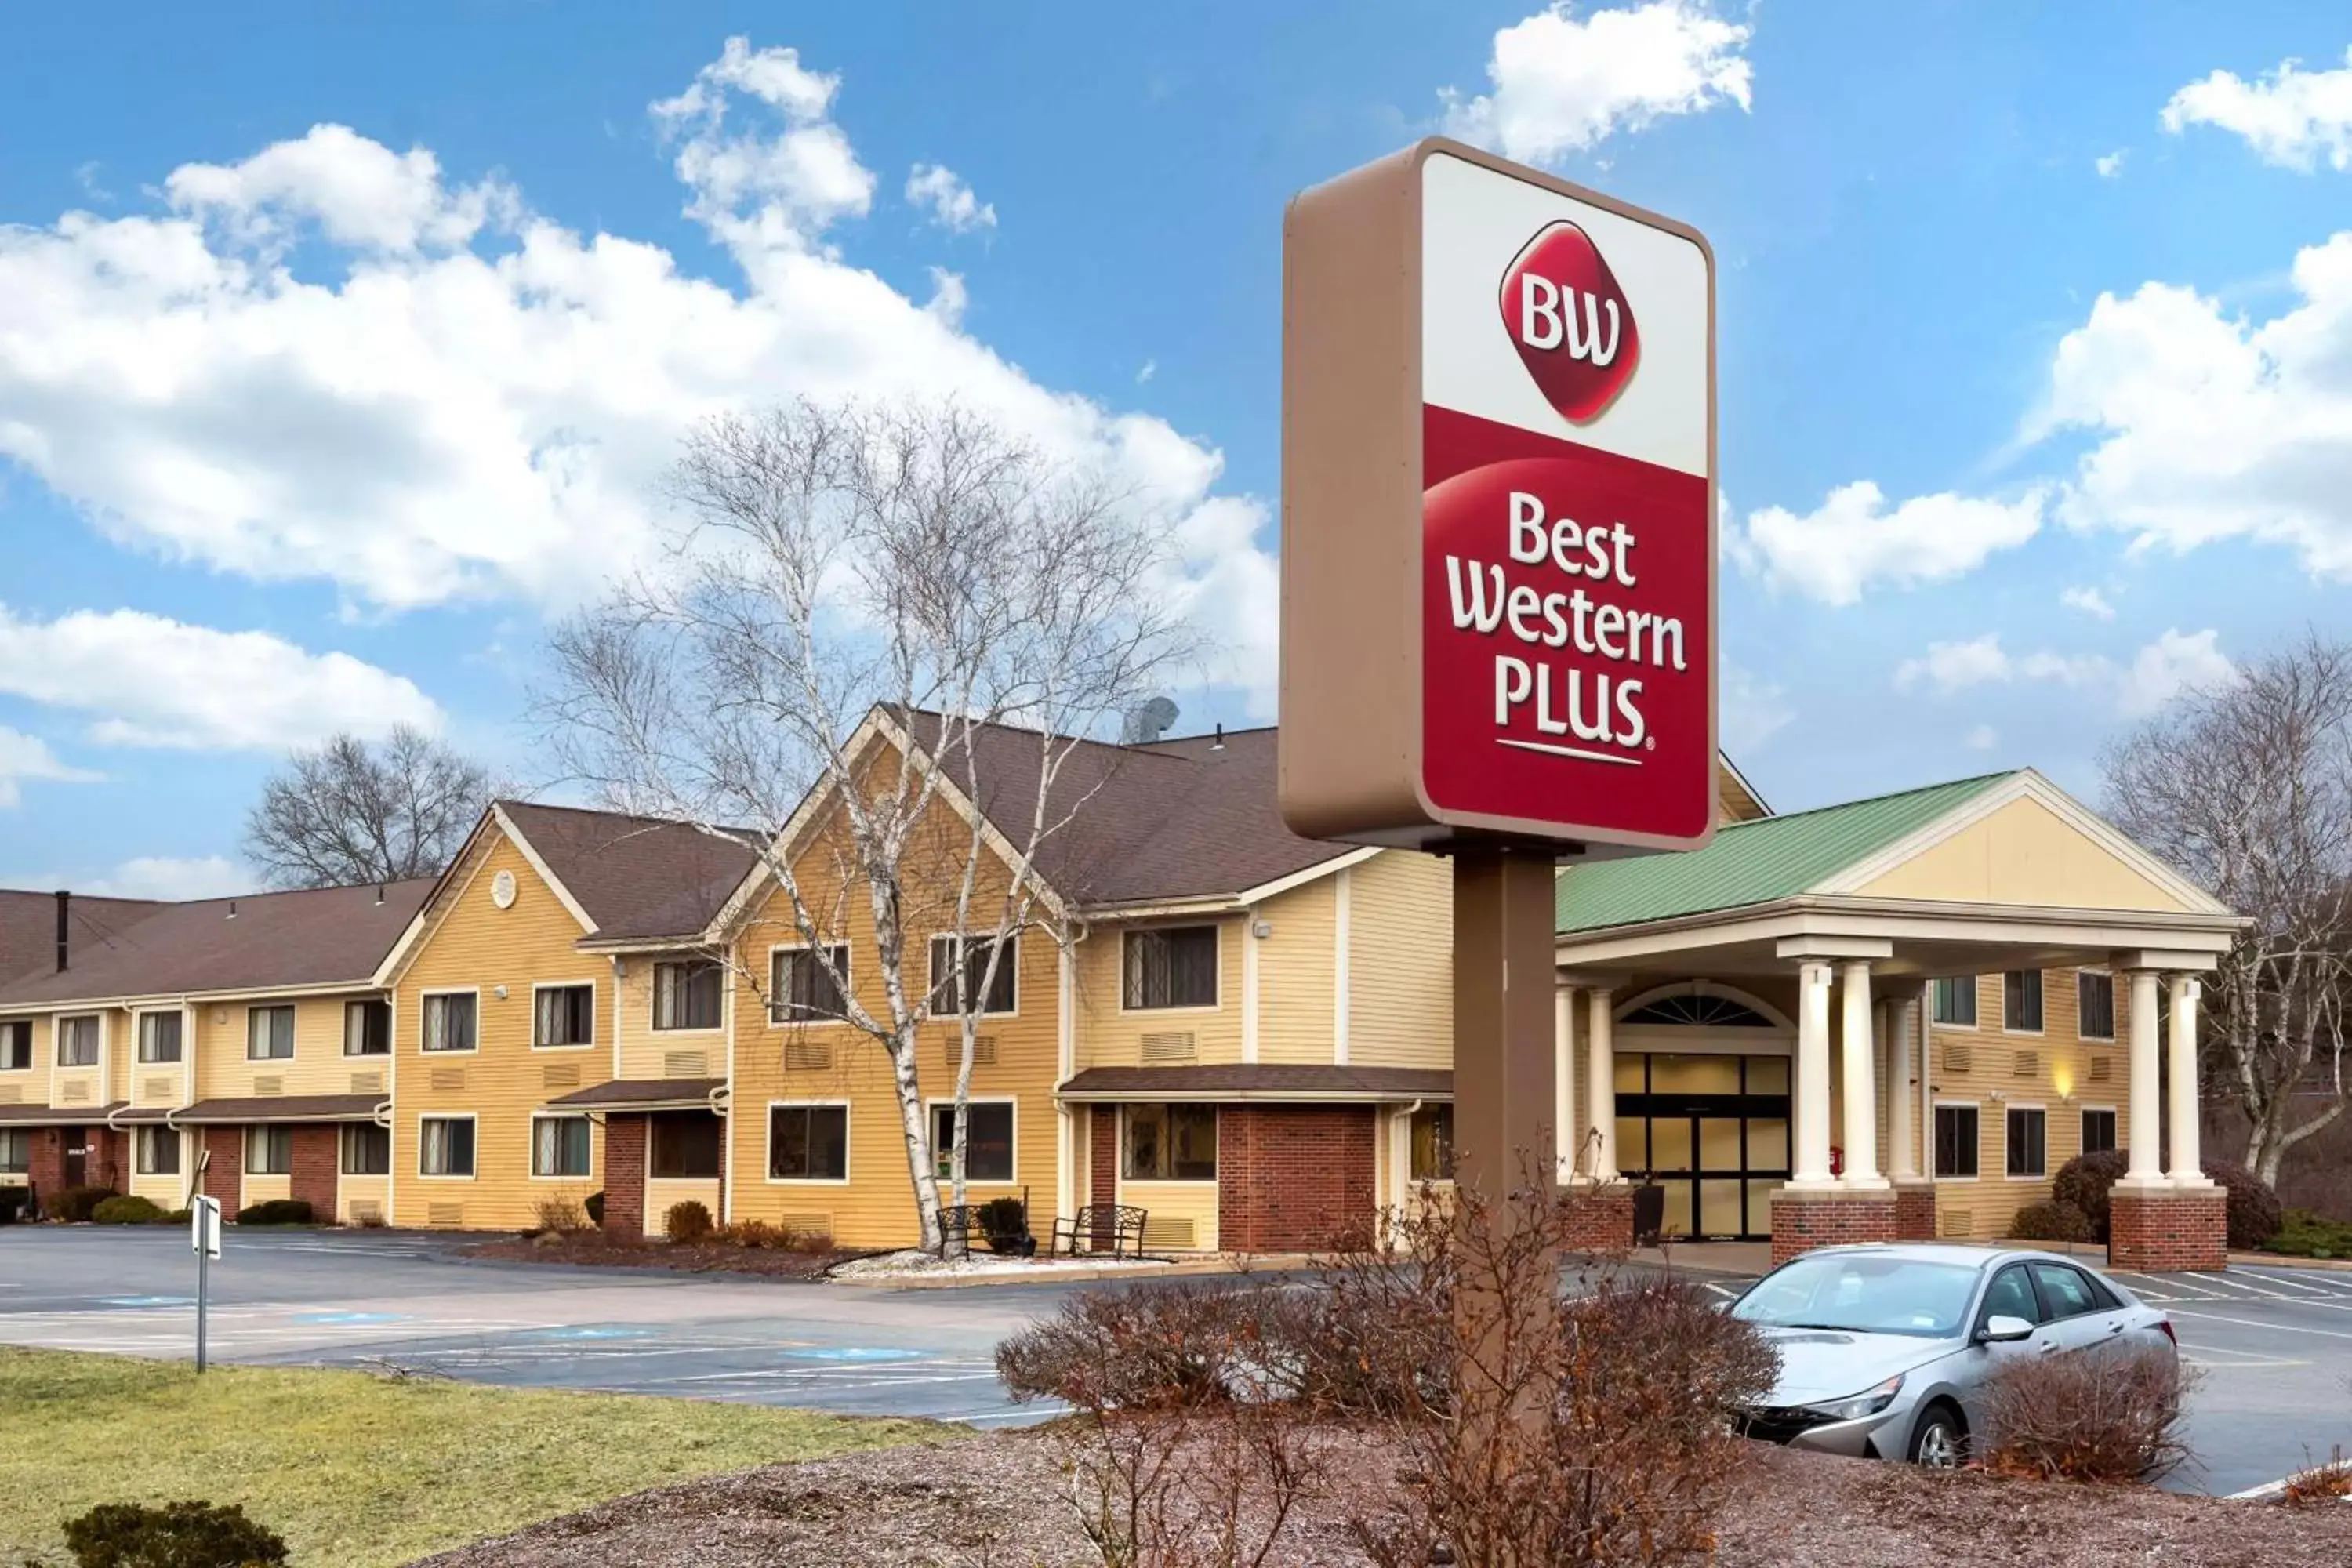 Property Building in Best Western Plus The Inn at Sharon/Foxboro